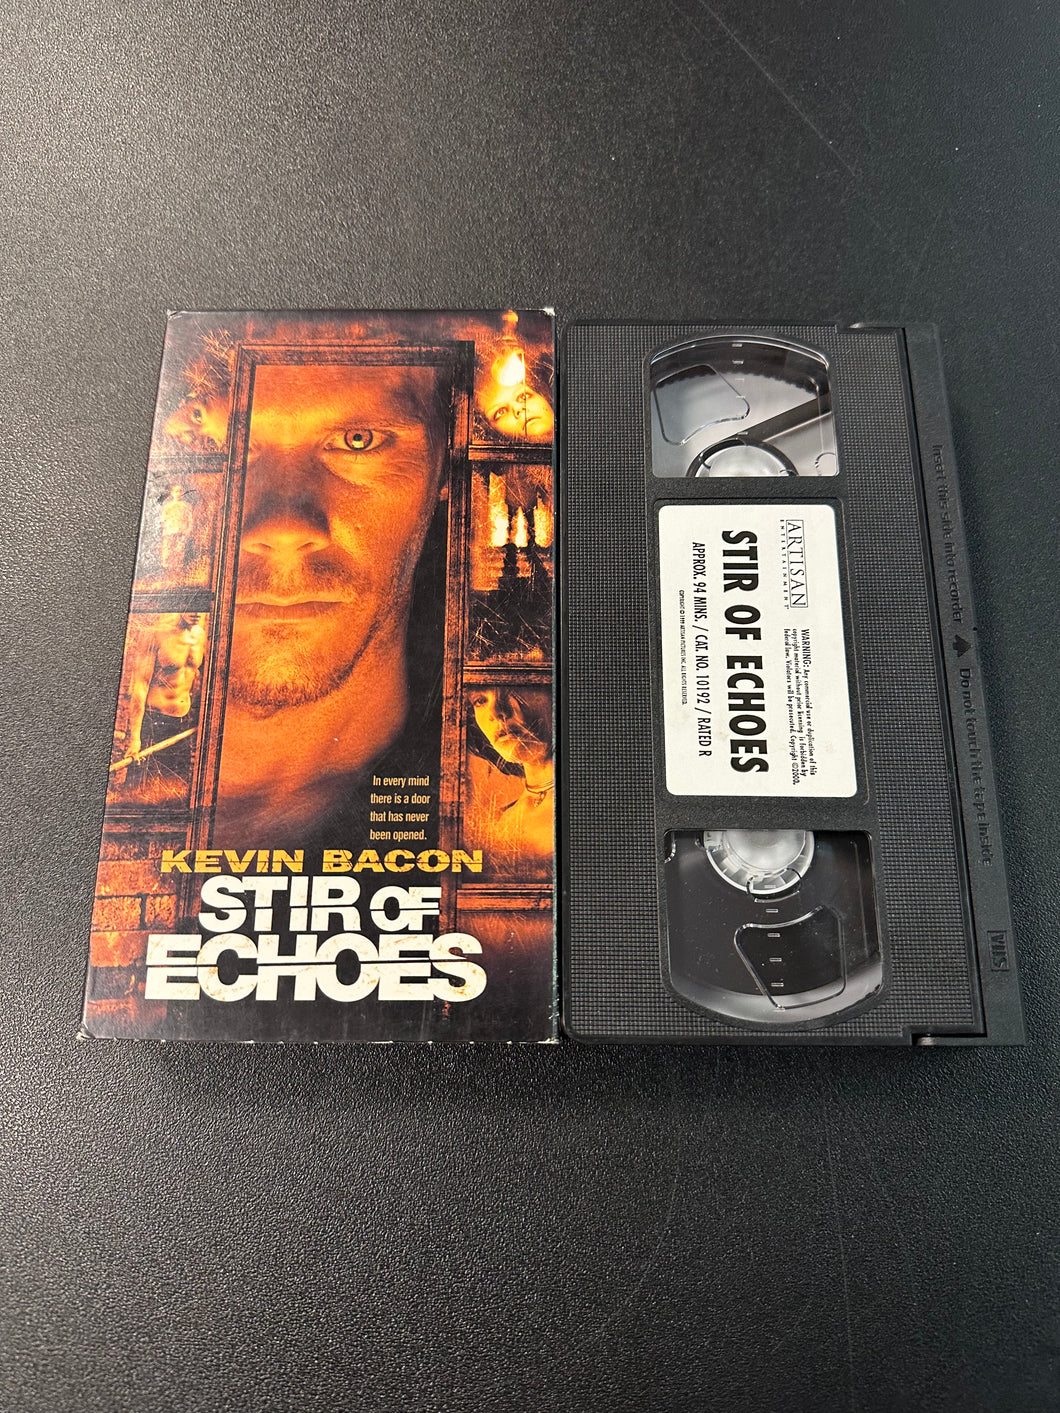 Stir of Echoes Kevin Bacon [VHS] PREOWNED Rental